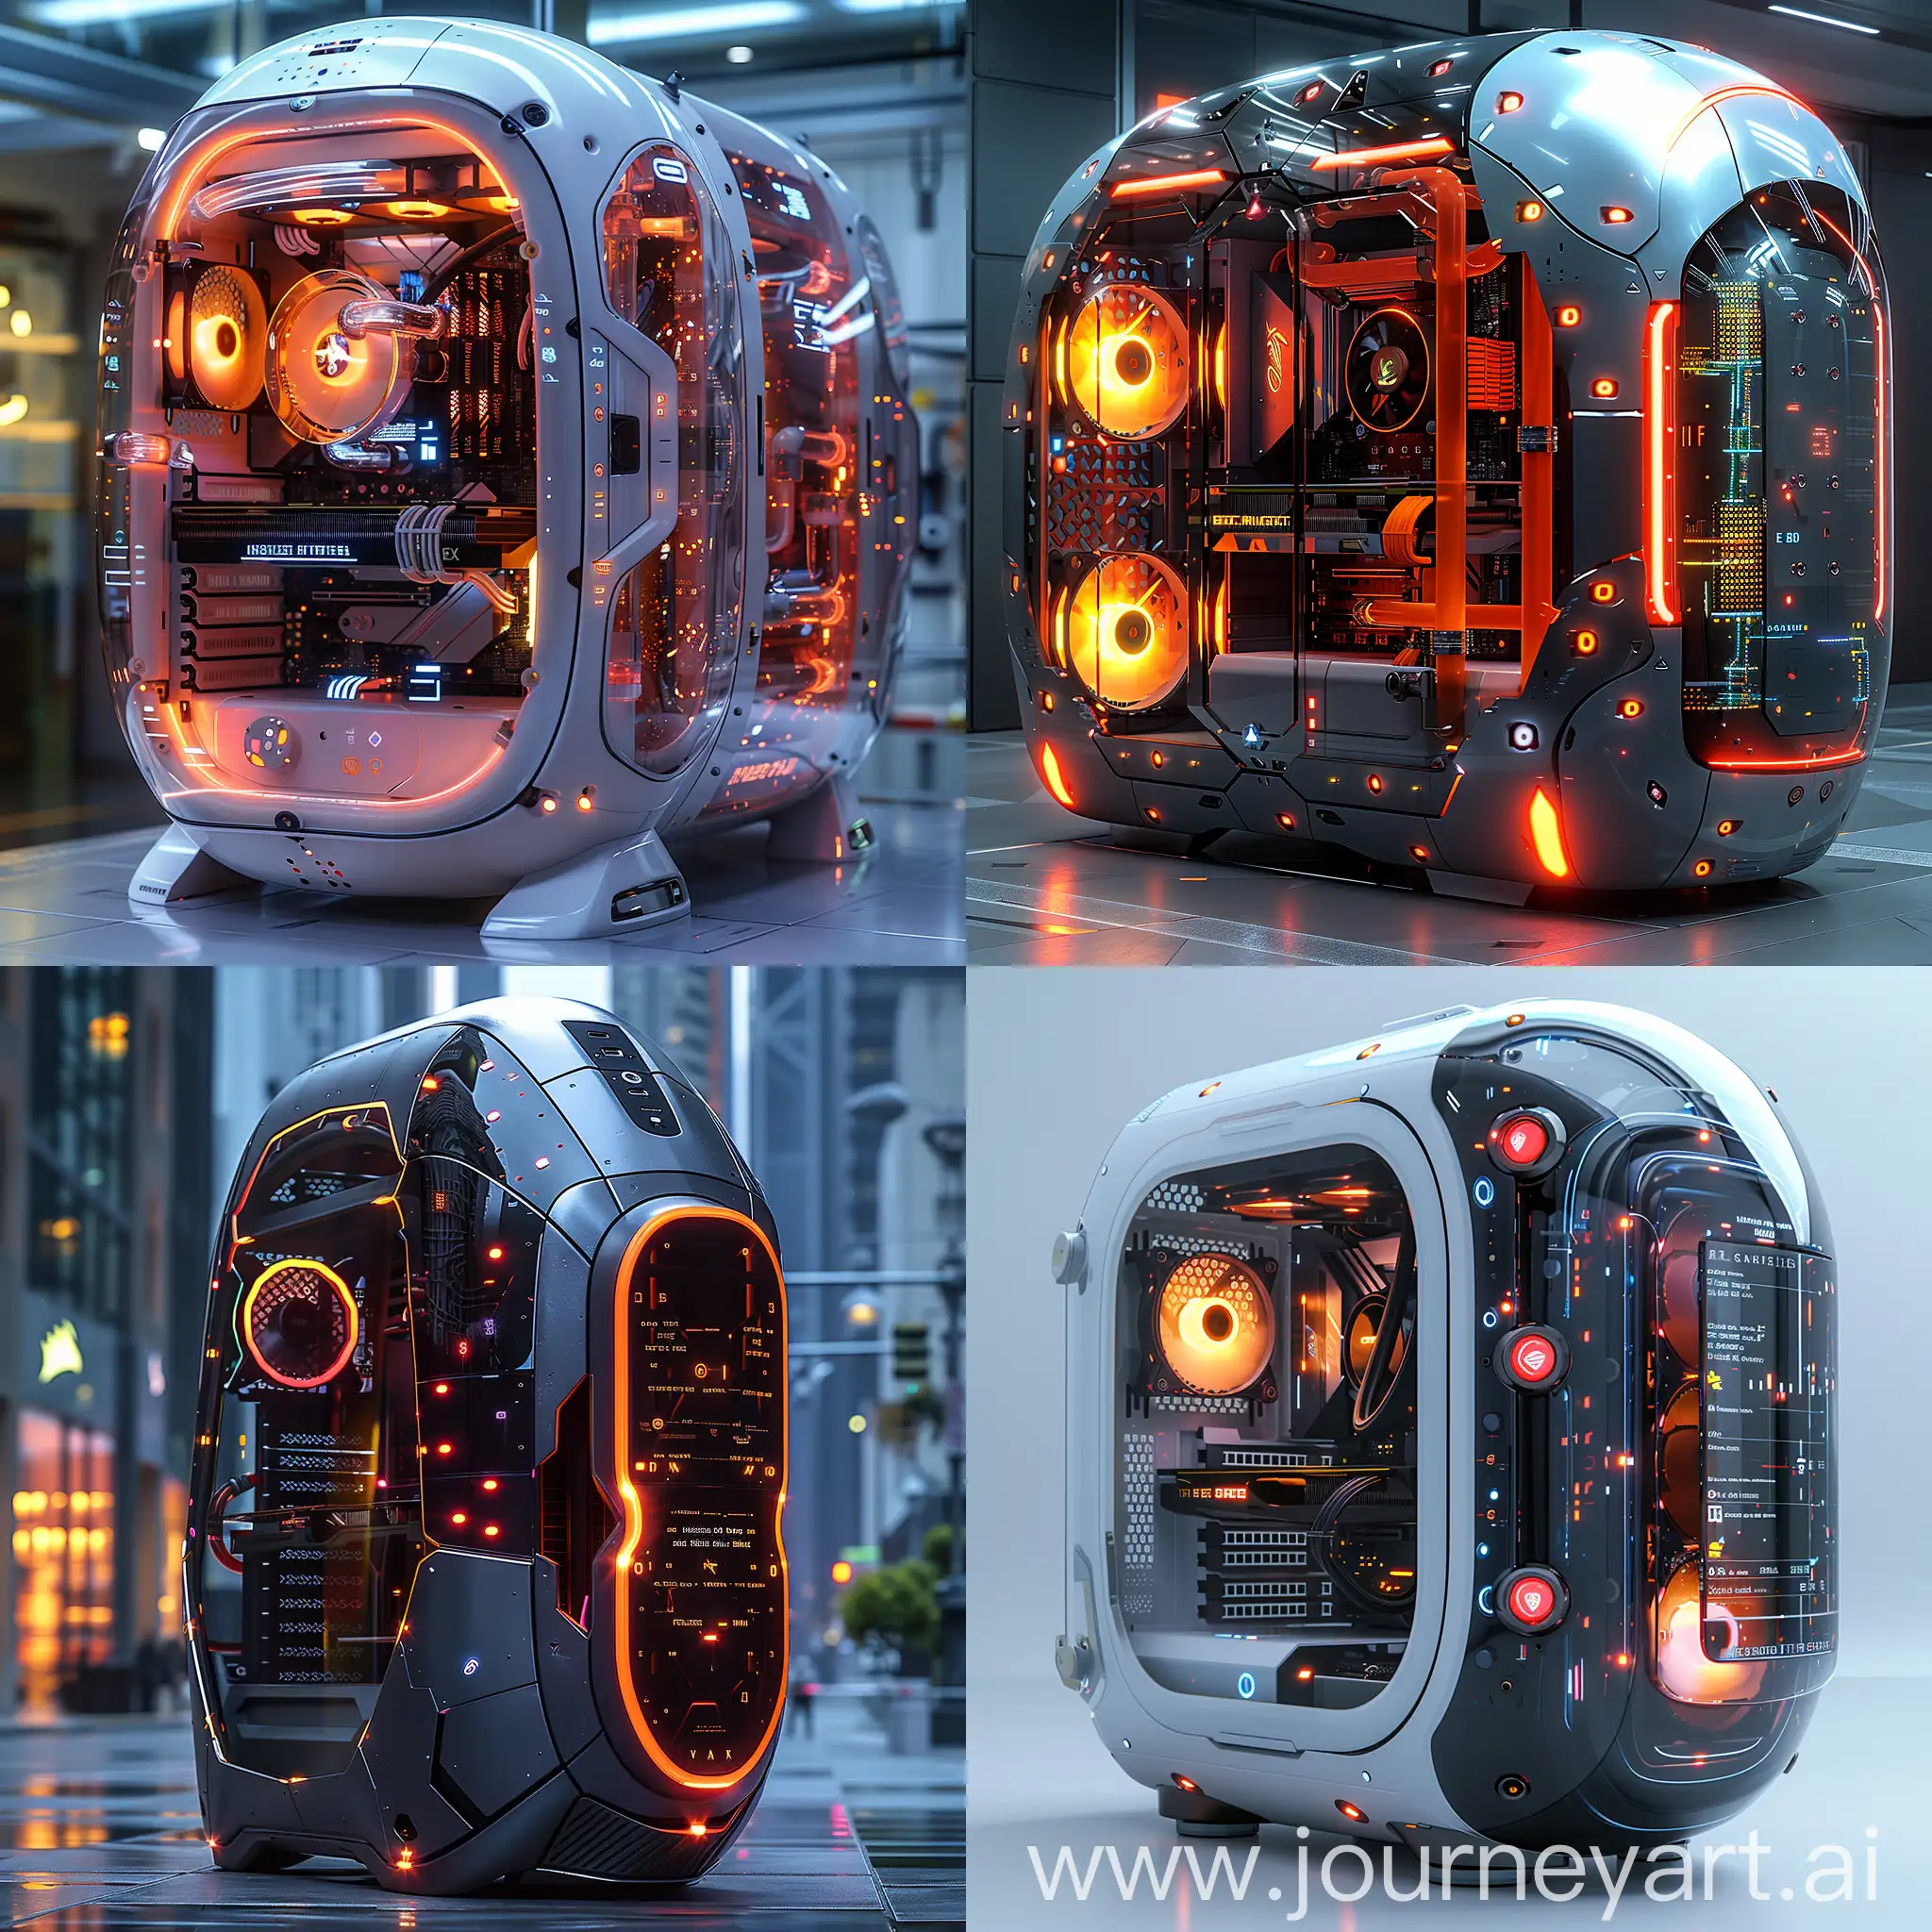 Futuristic PC case, Modular Component Slots, Integrated Cooling Systems, Wireless Power Transfer, Smart Dust Filters, OLED Display Panels, Sound Dampening Materials, Customizable RGB Lighting, Transparent OLED Side Panels, Holographic Projection, AI-Managed Thermal Regulation, Data Stream Visualization, Cloud Connectivity, Quantum-Ready Chipsets, Biometric Security Systems, Voice-Controlled Interface, Social Media Integration, Eco-Friendly Materials, Adaptive Form Factor, Embedded IoT Devices, Virtual Reality Ports, Aerodynamic Shape, Smart Glass Panels, Integrated Environmental Sensors, Dynamic Surface Textures, Solar Panel Integration, Kinetic Energy Harvesters, Ambient Light Response, Retractable Ports and Components, Magnetic Levitation Stand, Exterior OLED Touch Panels, Interactive LED Displays, Network Activity Indicators, Augmented Reality Overlays, Gesture Control Interface, E-Ink Customizable Skins, 3D-Printed Custom Attachments, Blockchain-Enabled Locks, Wireless Data Transfer Hub, Personal Assistant Projection, Information Age Artwork, in ultra-futuristic style, in ultrafuturistic style, in ultra futuristic style, unreal engine 5 --stylize 1000